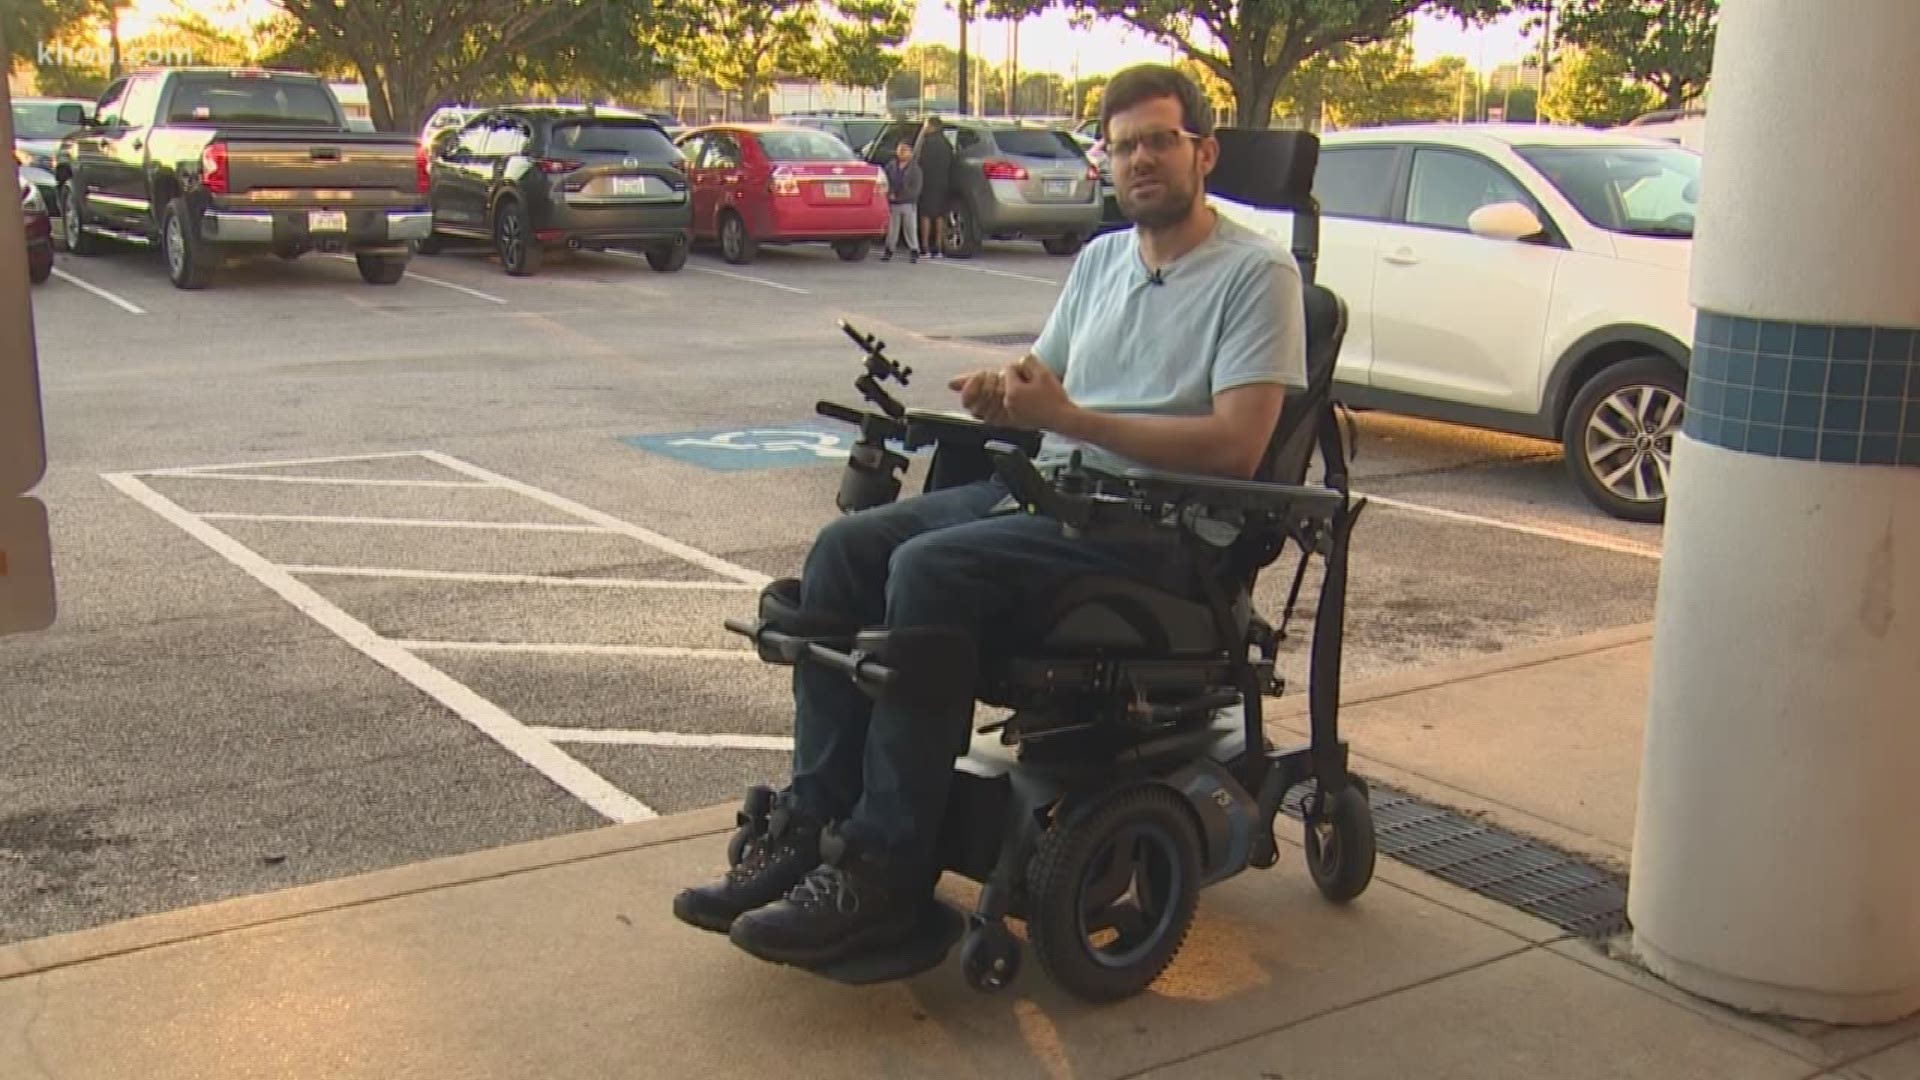 An out-of-town news crew blocks a handicap spot at a polling place. An adult and children are caught on camera stealing Halloween candy in Kingwood, plus more top stories on KHOU 11 News at 10 p.m. for Nov. 1, 2018.